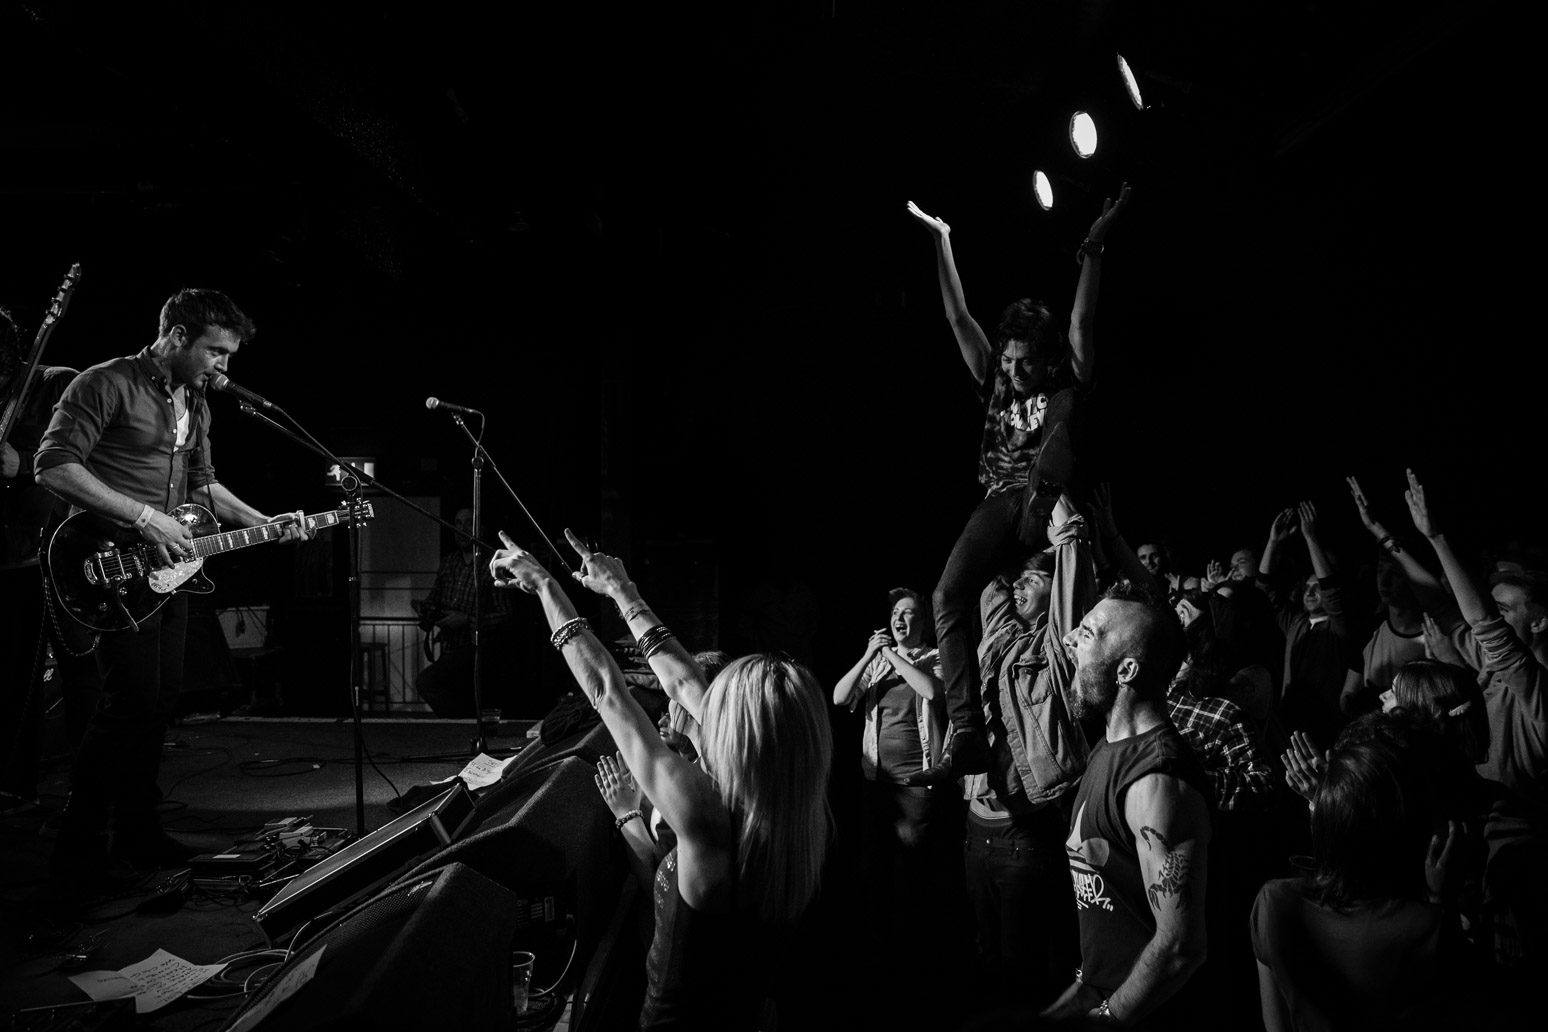 Event photography - The Reveurs live at Manchester Academy black & white